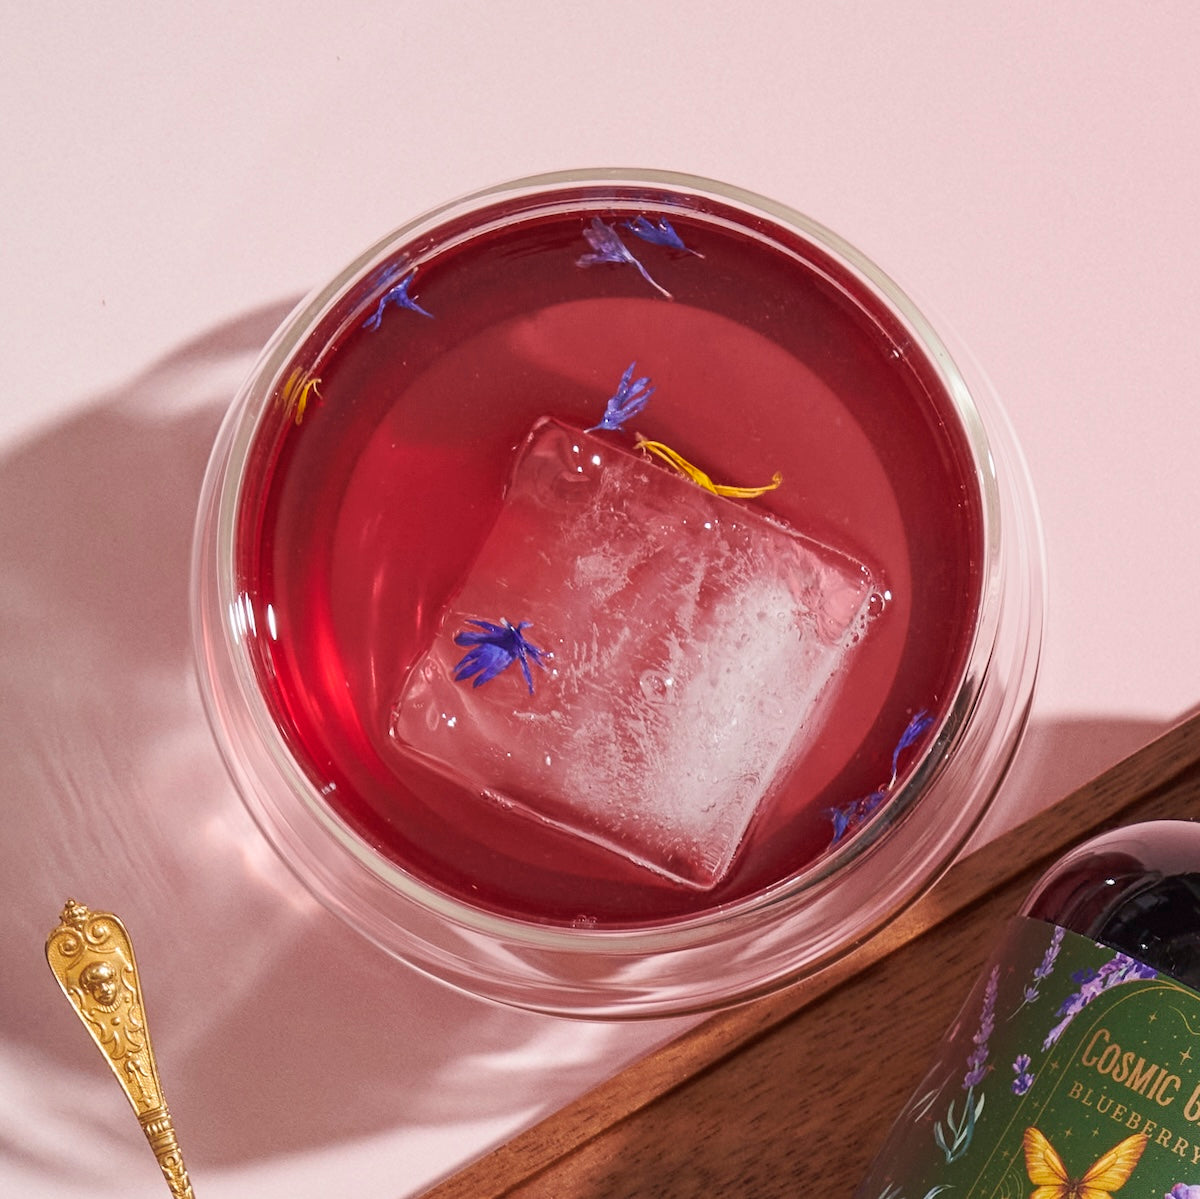 A bright pink beverage in a clear glass is garnished with a large, clear ice cube and small blue and yellow flower petals. The drink, crafted from Blueberry Lavender Mint: Cosmic Garden Iced Tea by Magic Hour, is placed on a light pink surface near a golden spoon and a partially visible bottle with a colorful label.